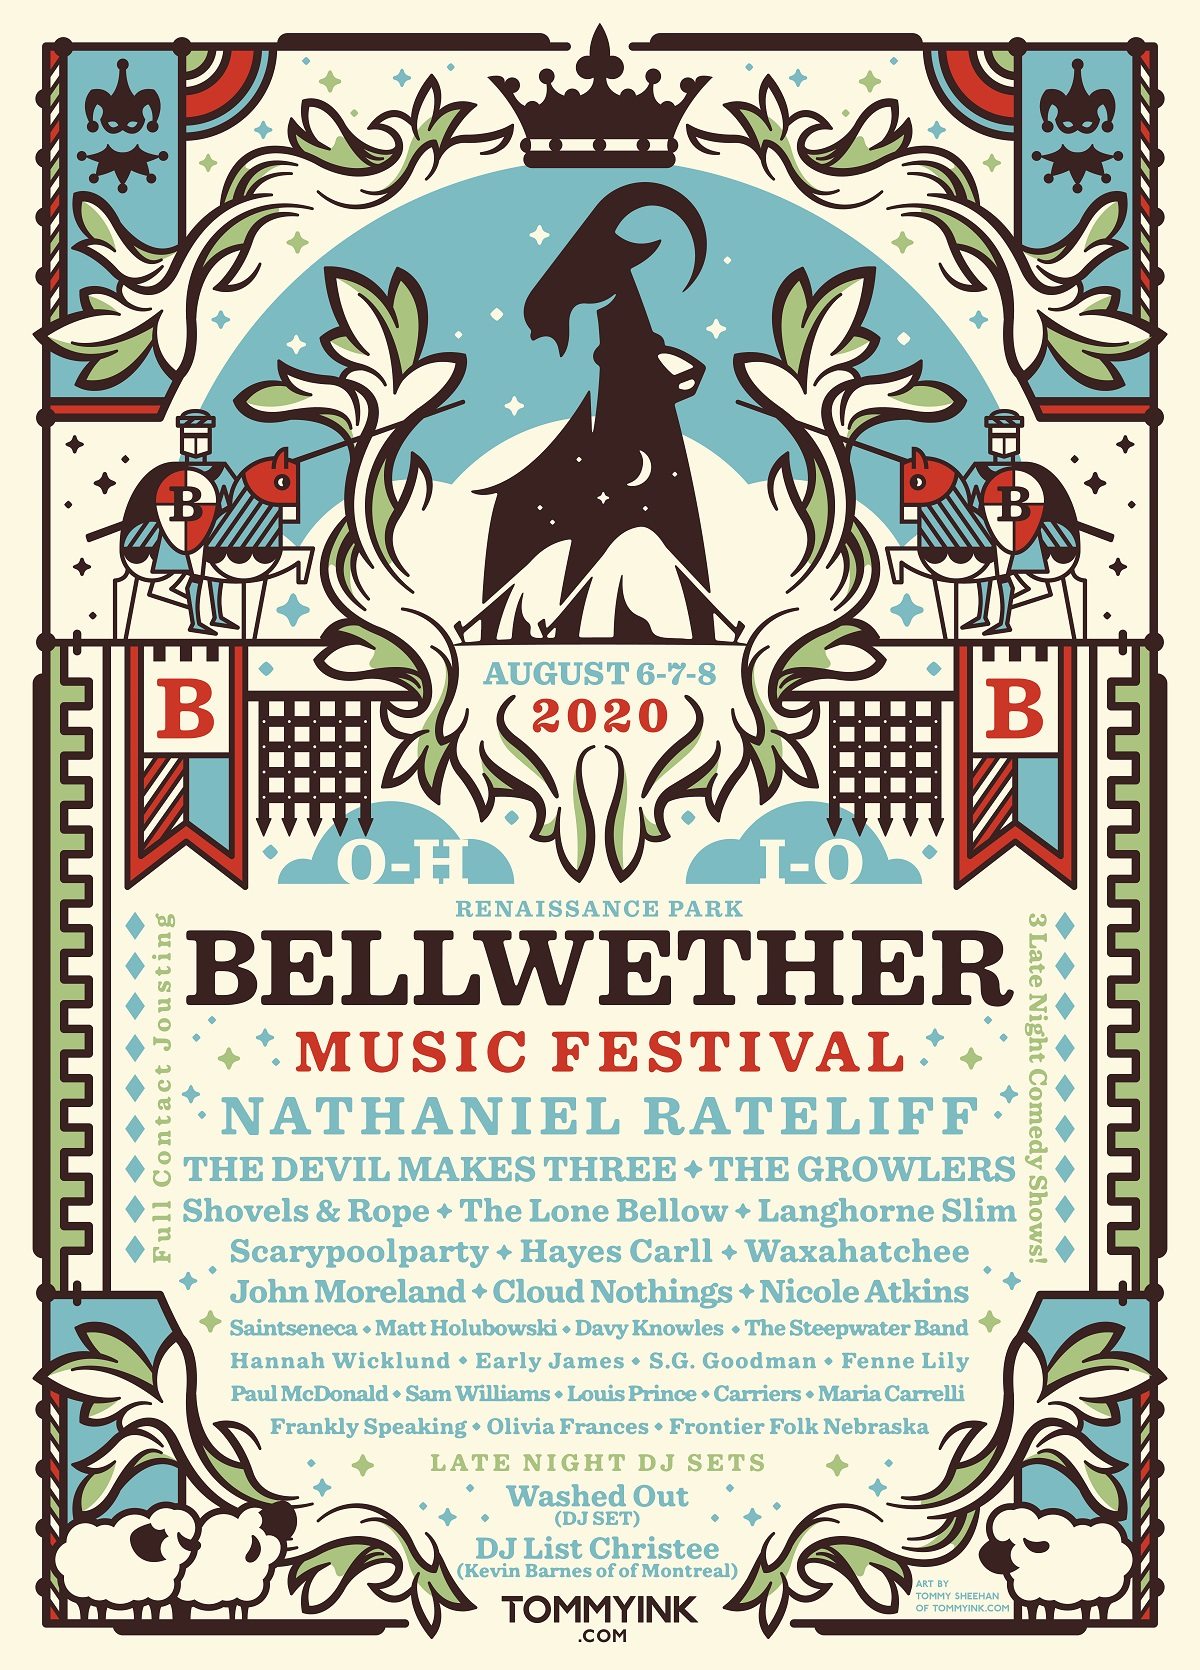 Bellwether Music Festival in Ohio Expands to Three Days & Announces 2020 Artist Lineup